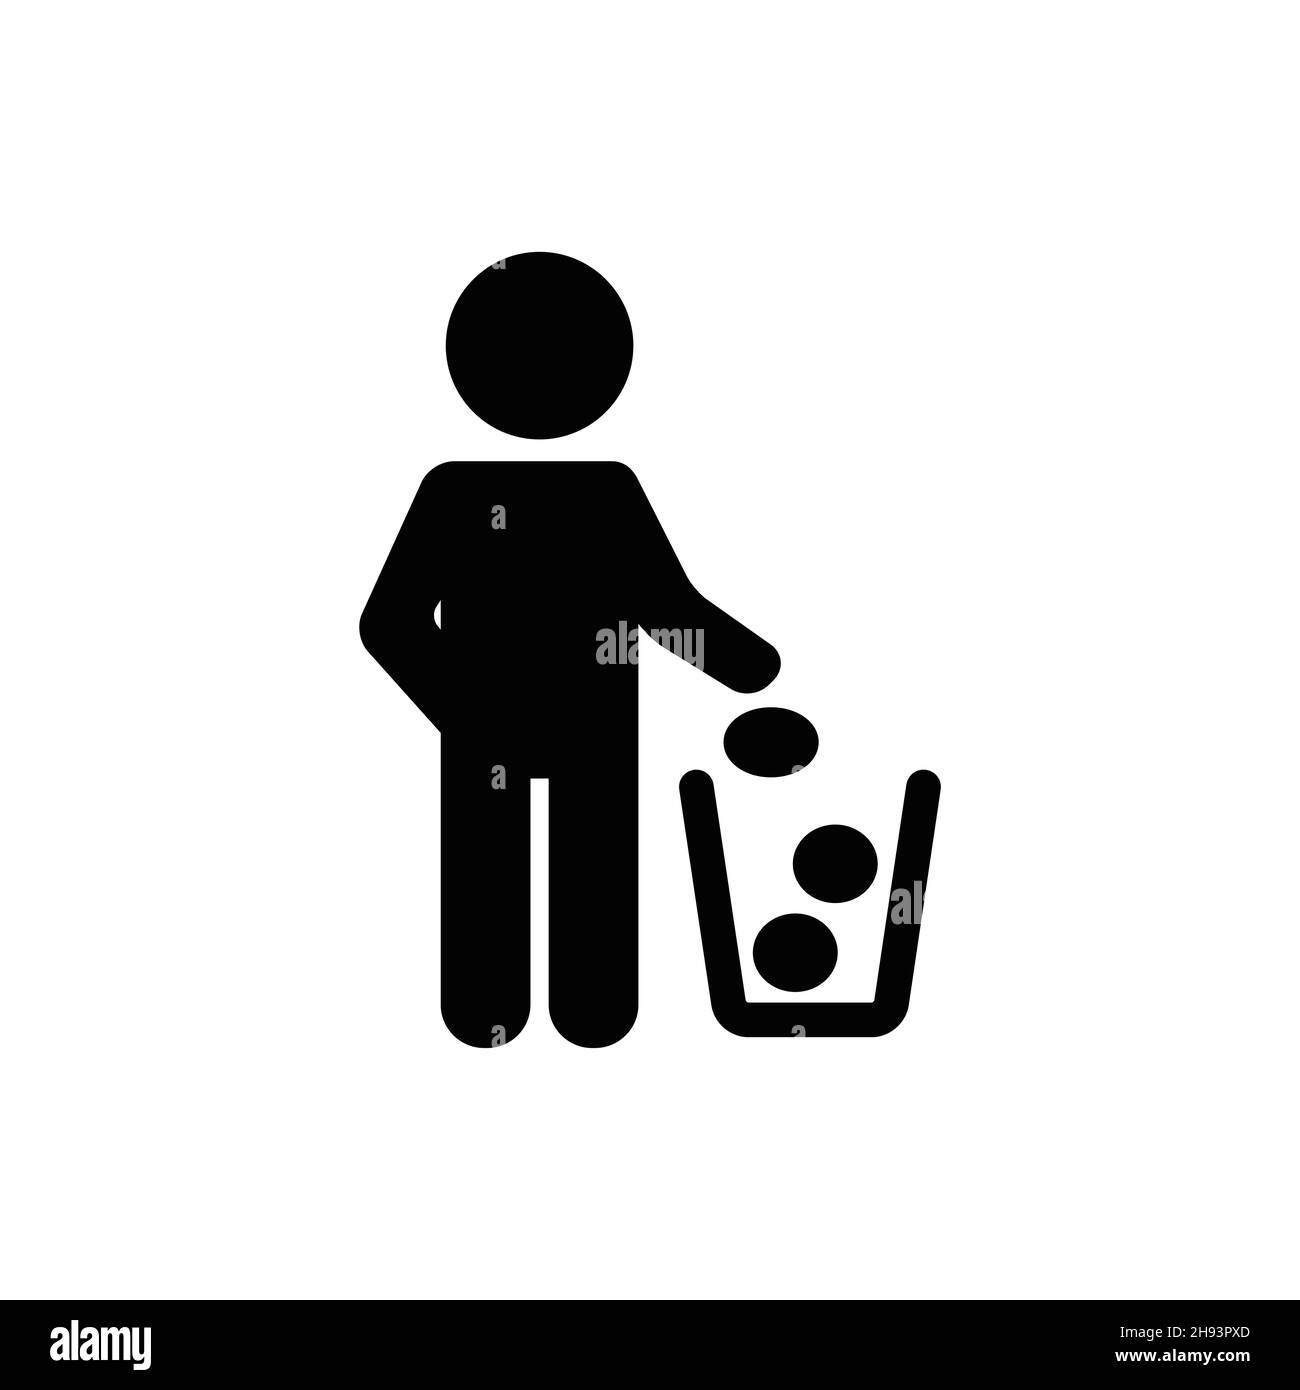 Keep clean icon. Do not litter sign. Silhouette of a man, throwing garbage in a bin, isolated on white background. No littering symbol in square. Publ Stock Vector